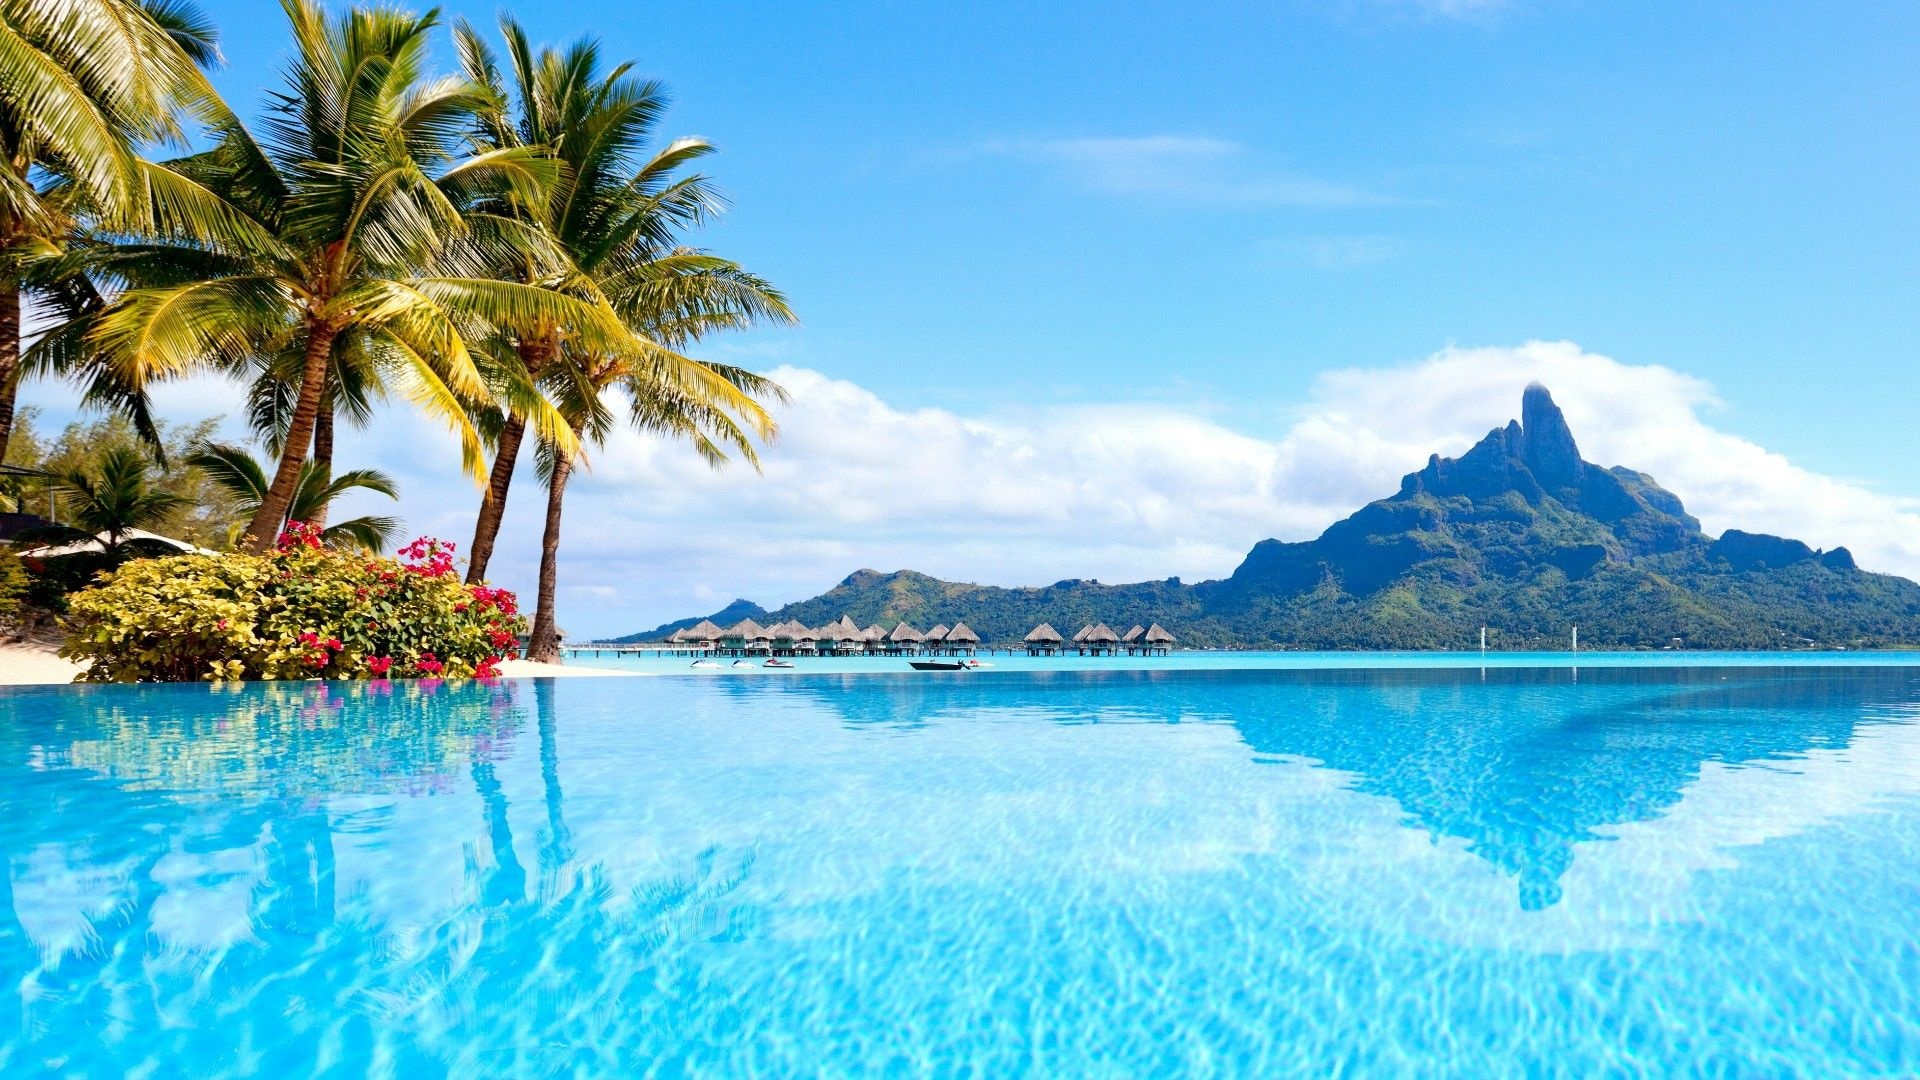 Bora Bora: An island of relief and contrast, White sandy beaches and crystal clear lagoon. 1920x1080 Full HD Wallpaper.